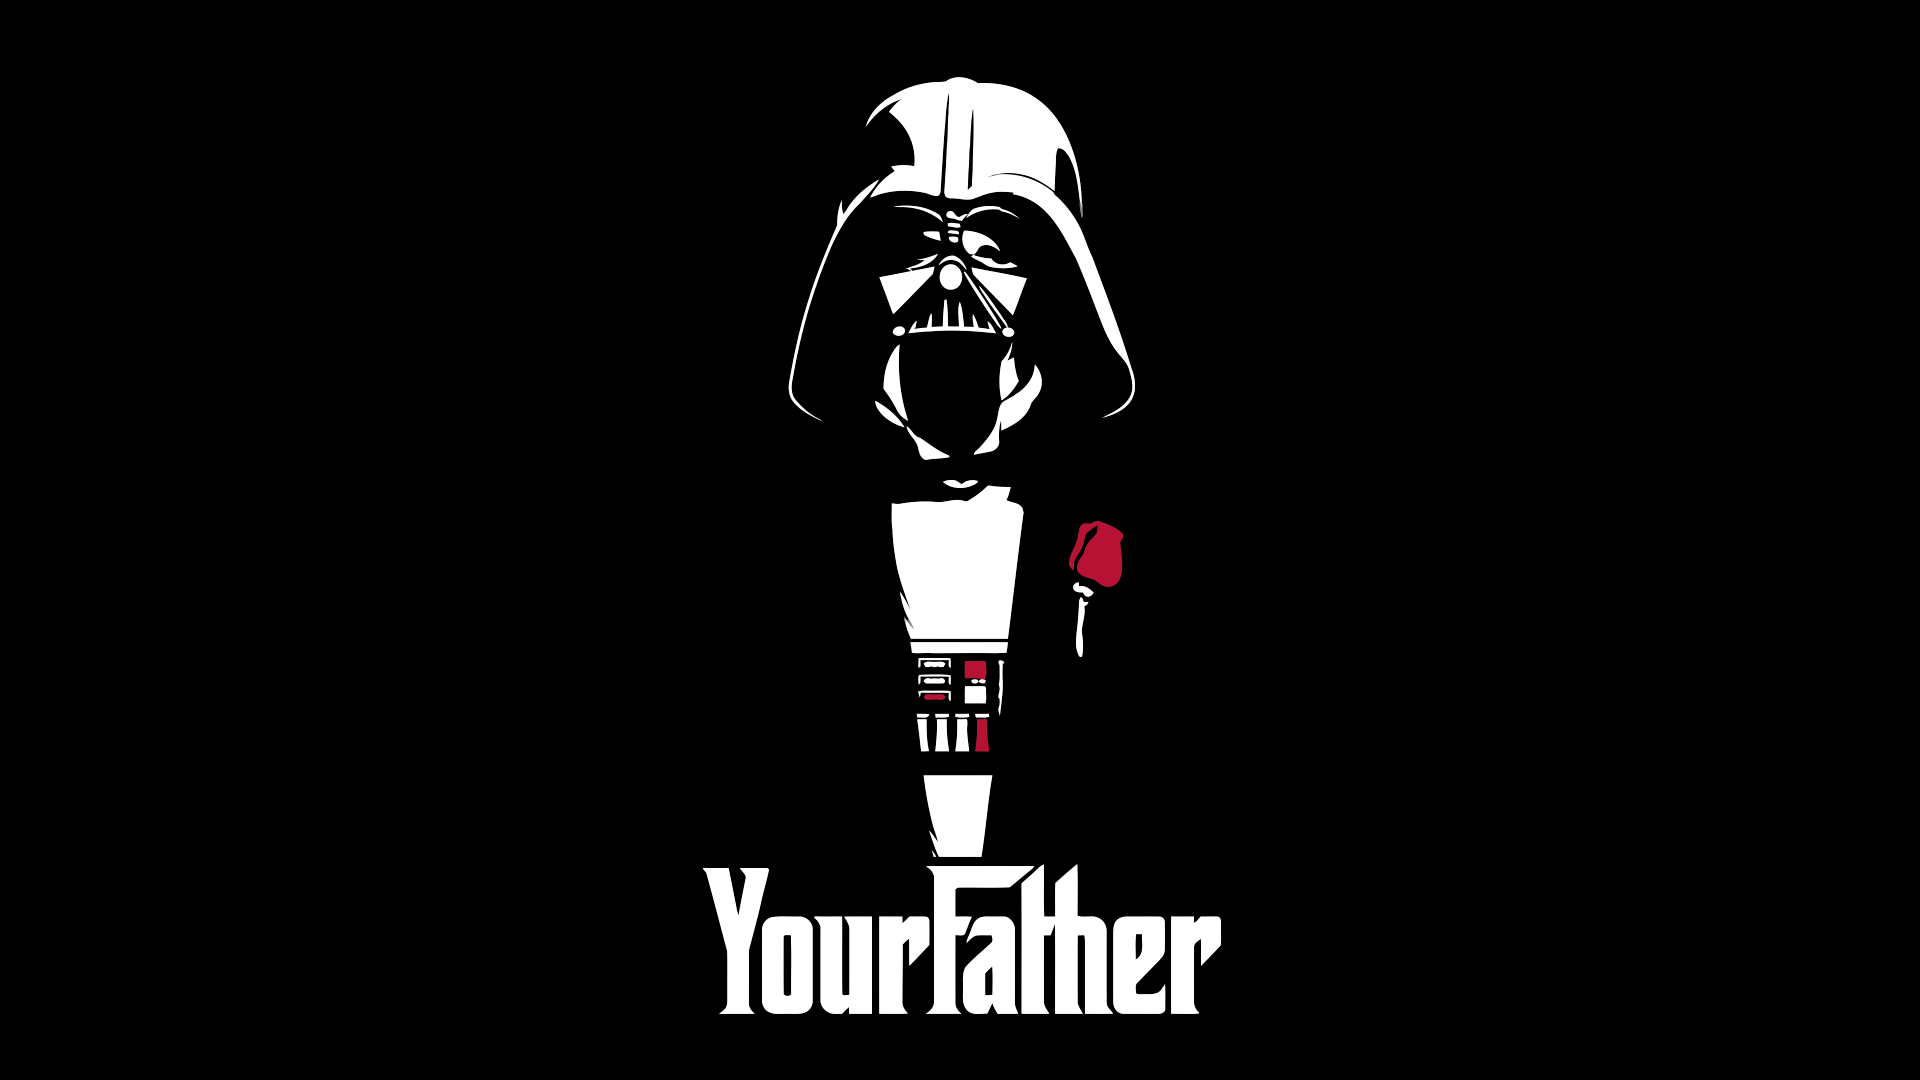 General 1920x1080 Darth Vader The Godfather father Star Wars Sith selective coloring humor spoilers minimalism crossover Star Wars Villains movie characters